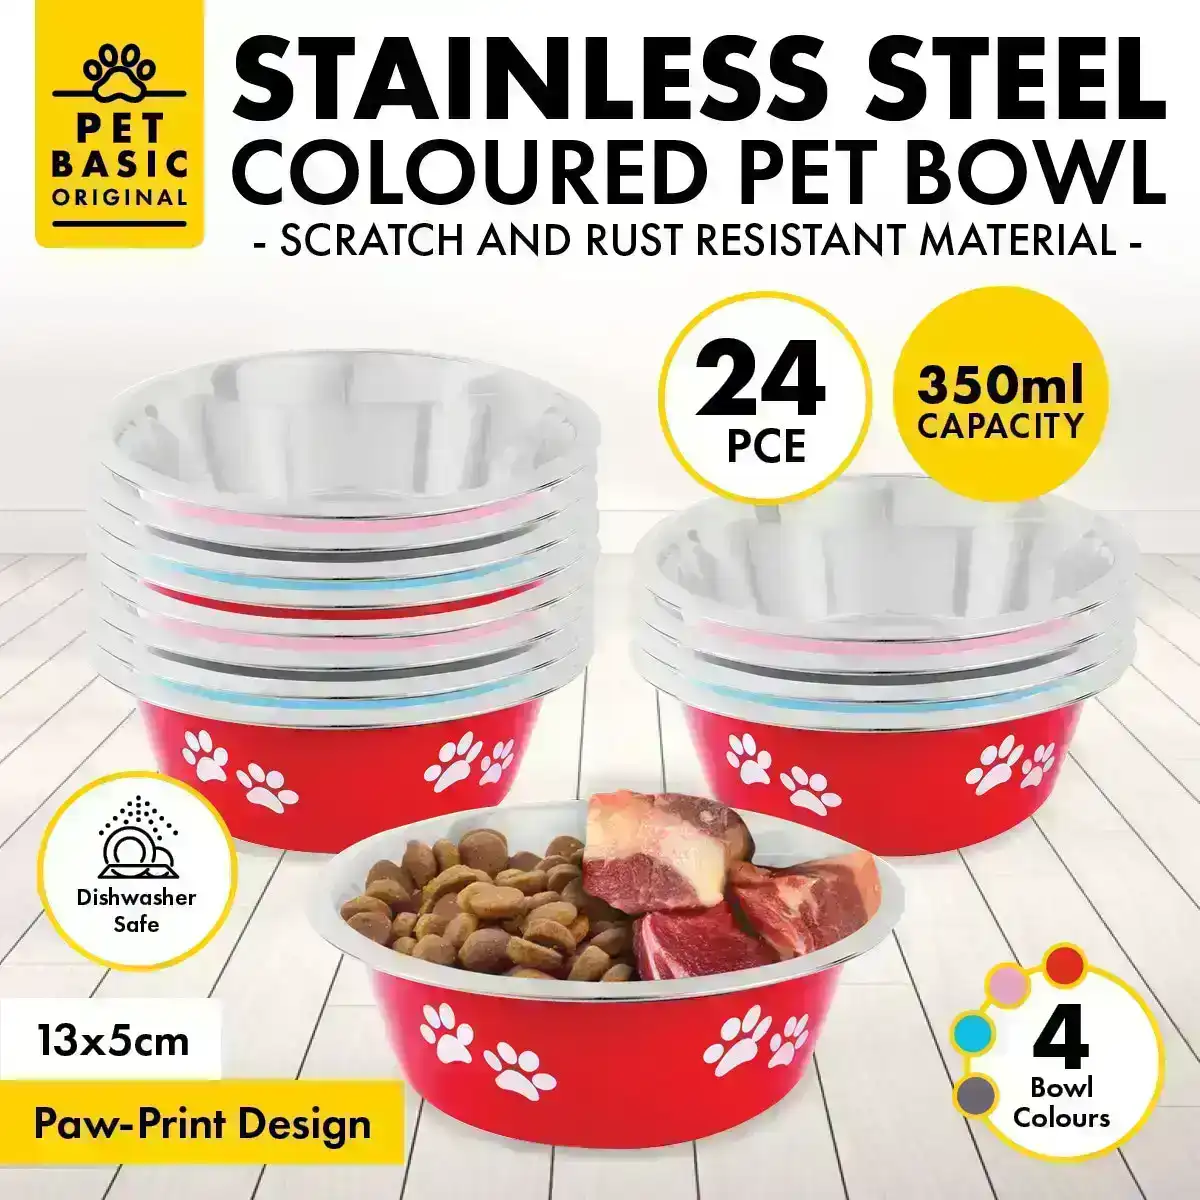 Pet Basic® 24PCE Pet Bowls 13cm Stainless Steel Coloured With Paw Prints 350ml